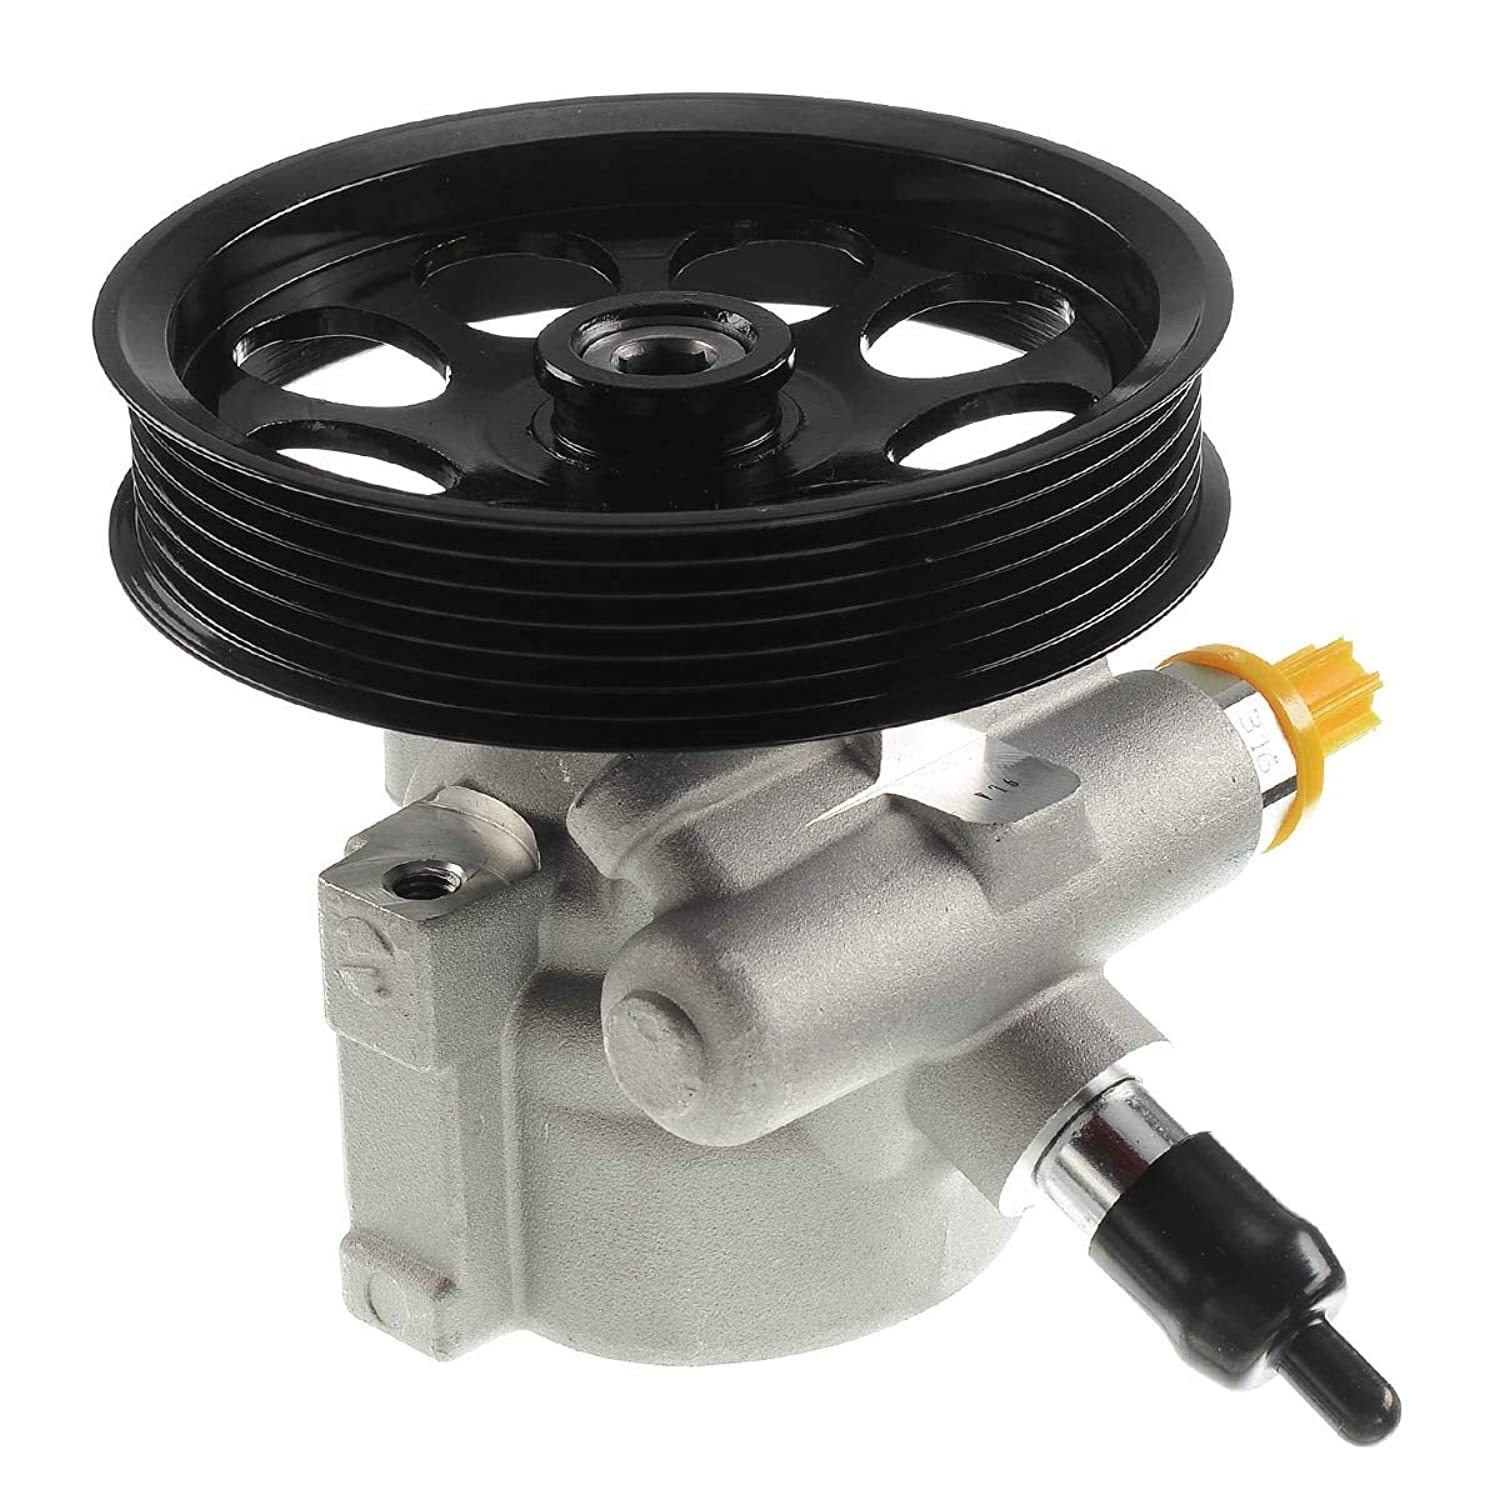 Power Steering Pump With Pulley Replacement For Saab 9-3 2000-2003.. - $115.99